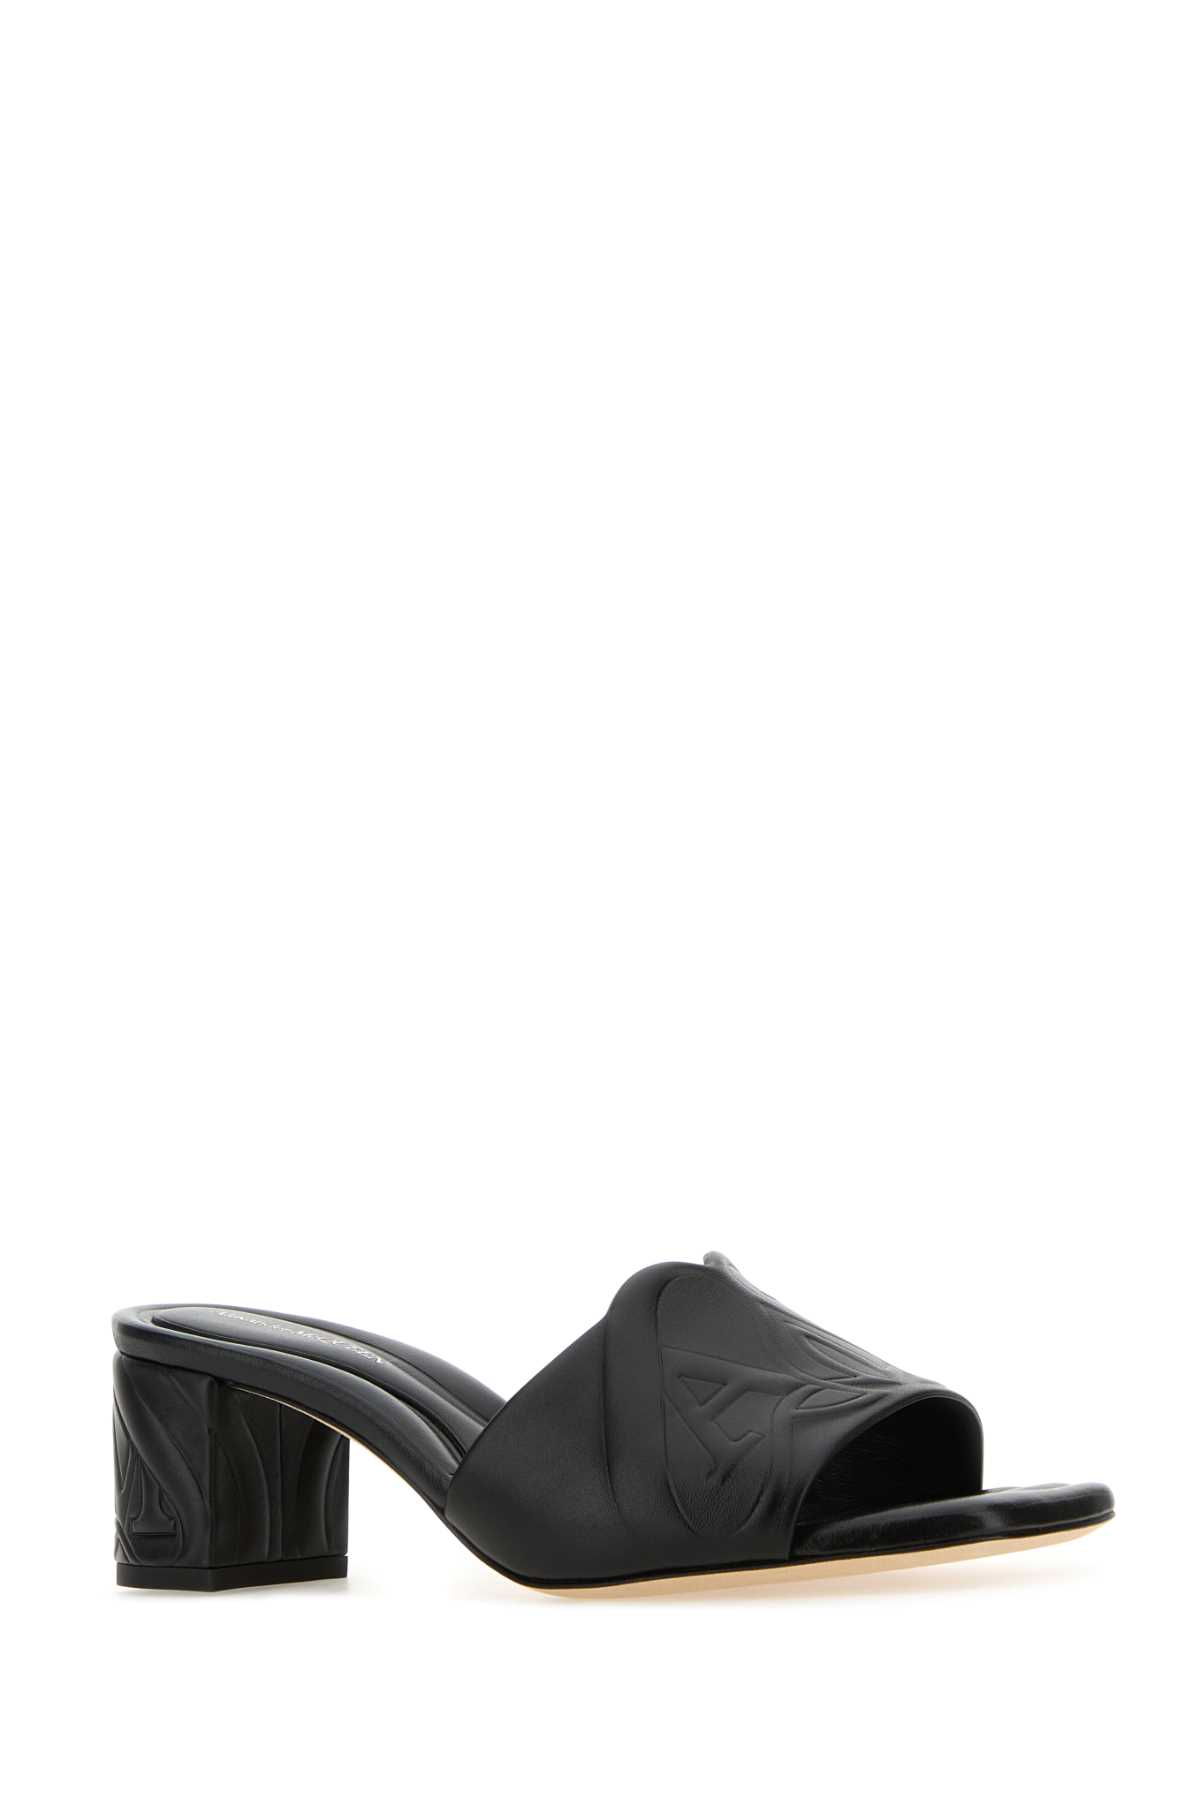 Shop Alexander Mcqueen Black Leather Seal Mules